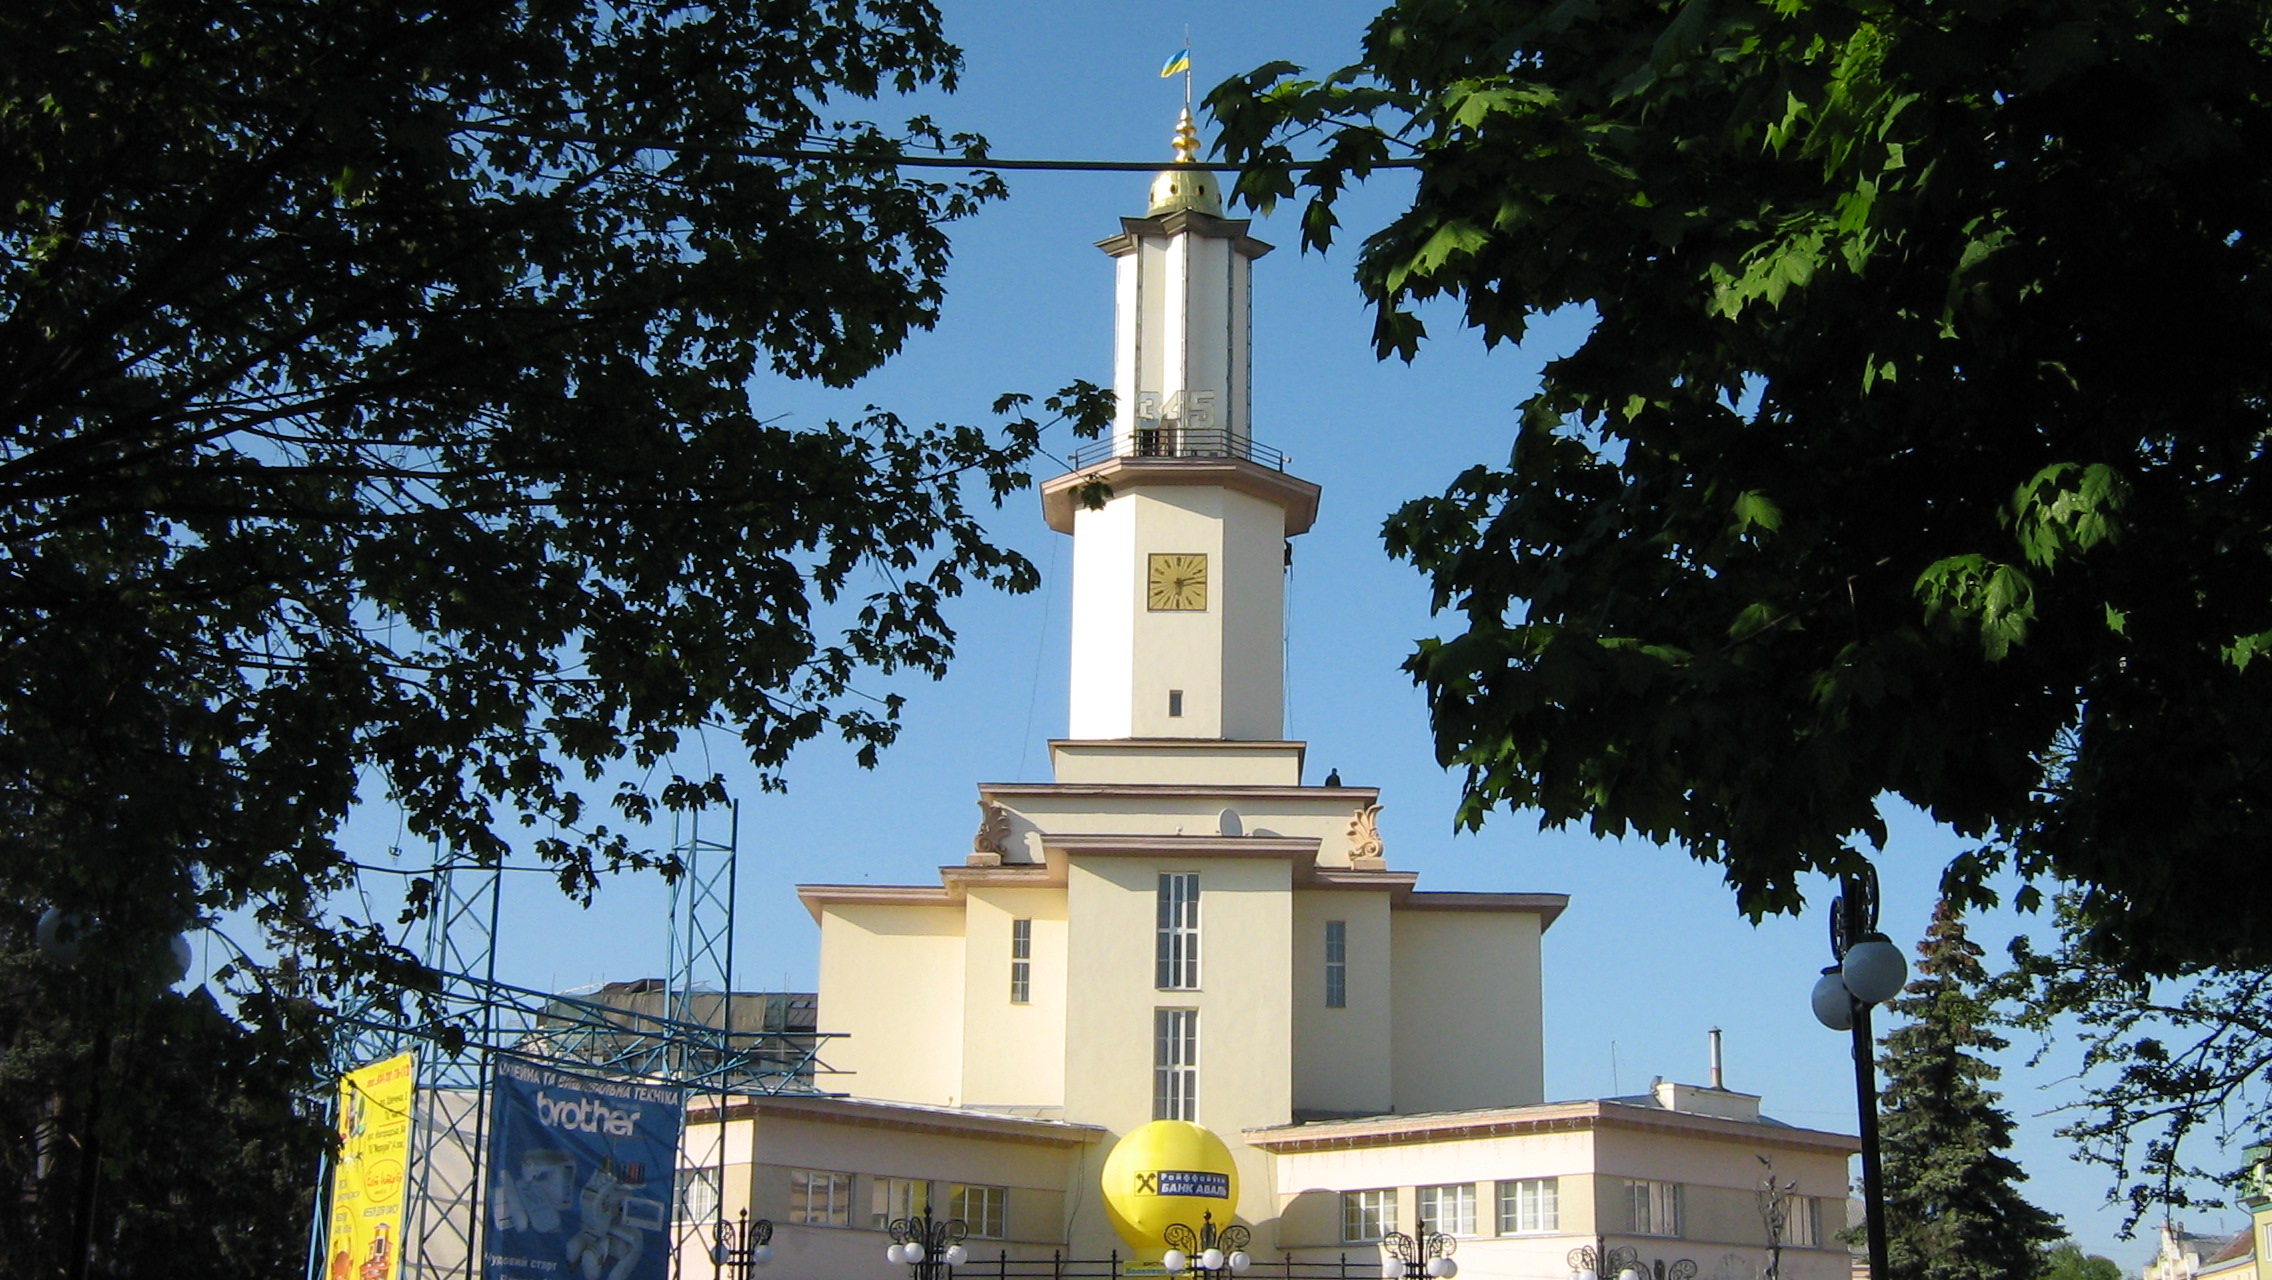 Ivano-Frankivsk Old Town Hall